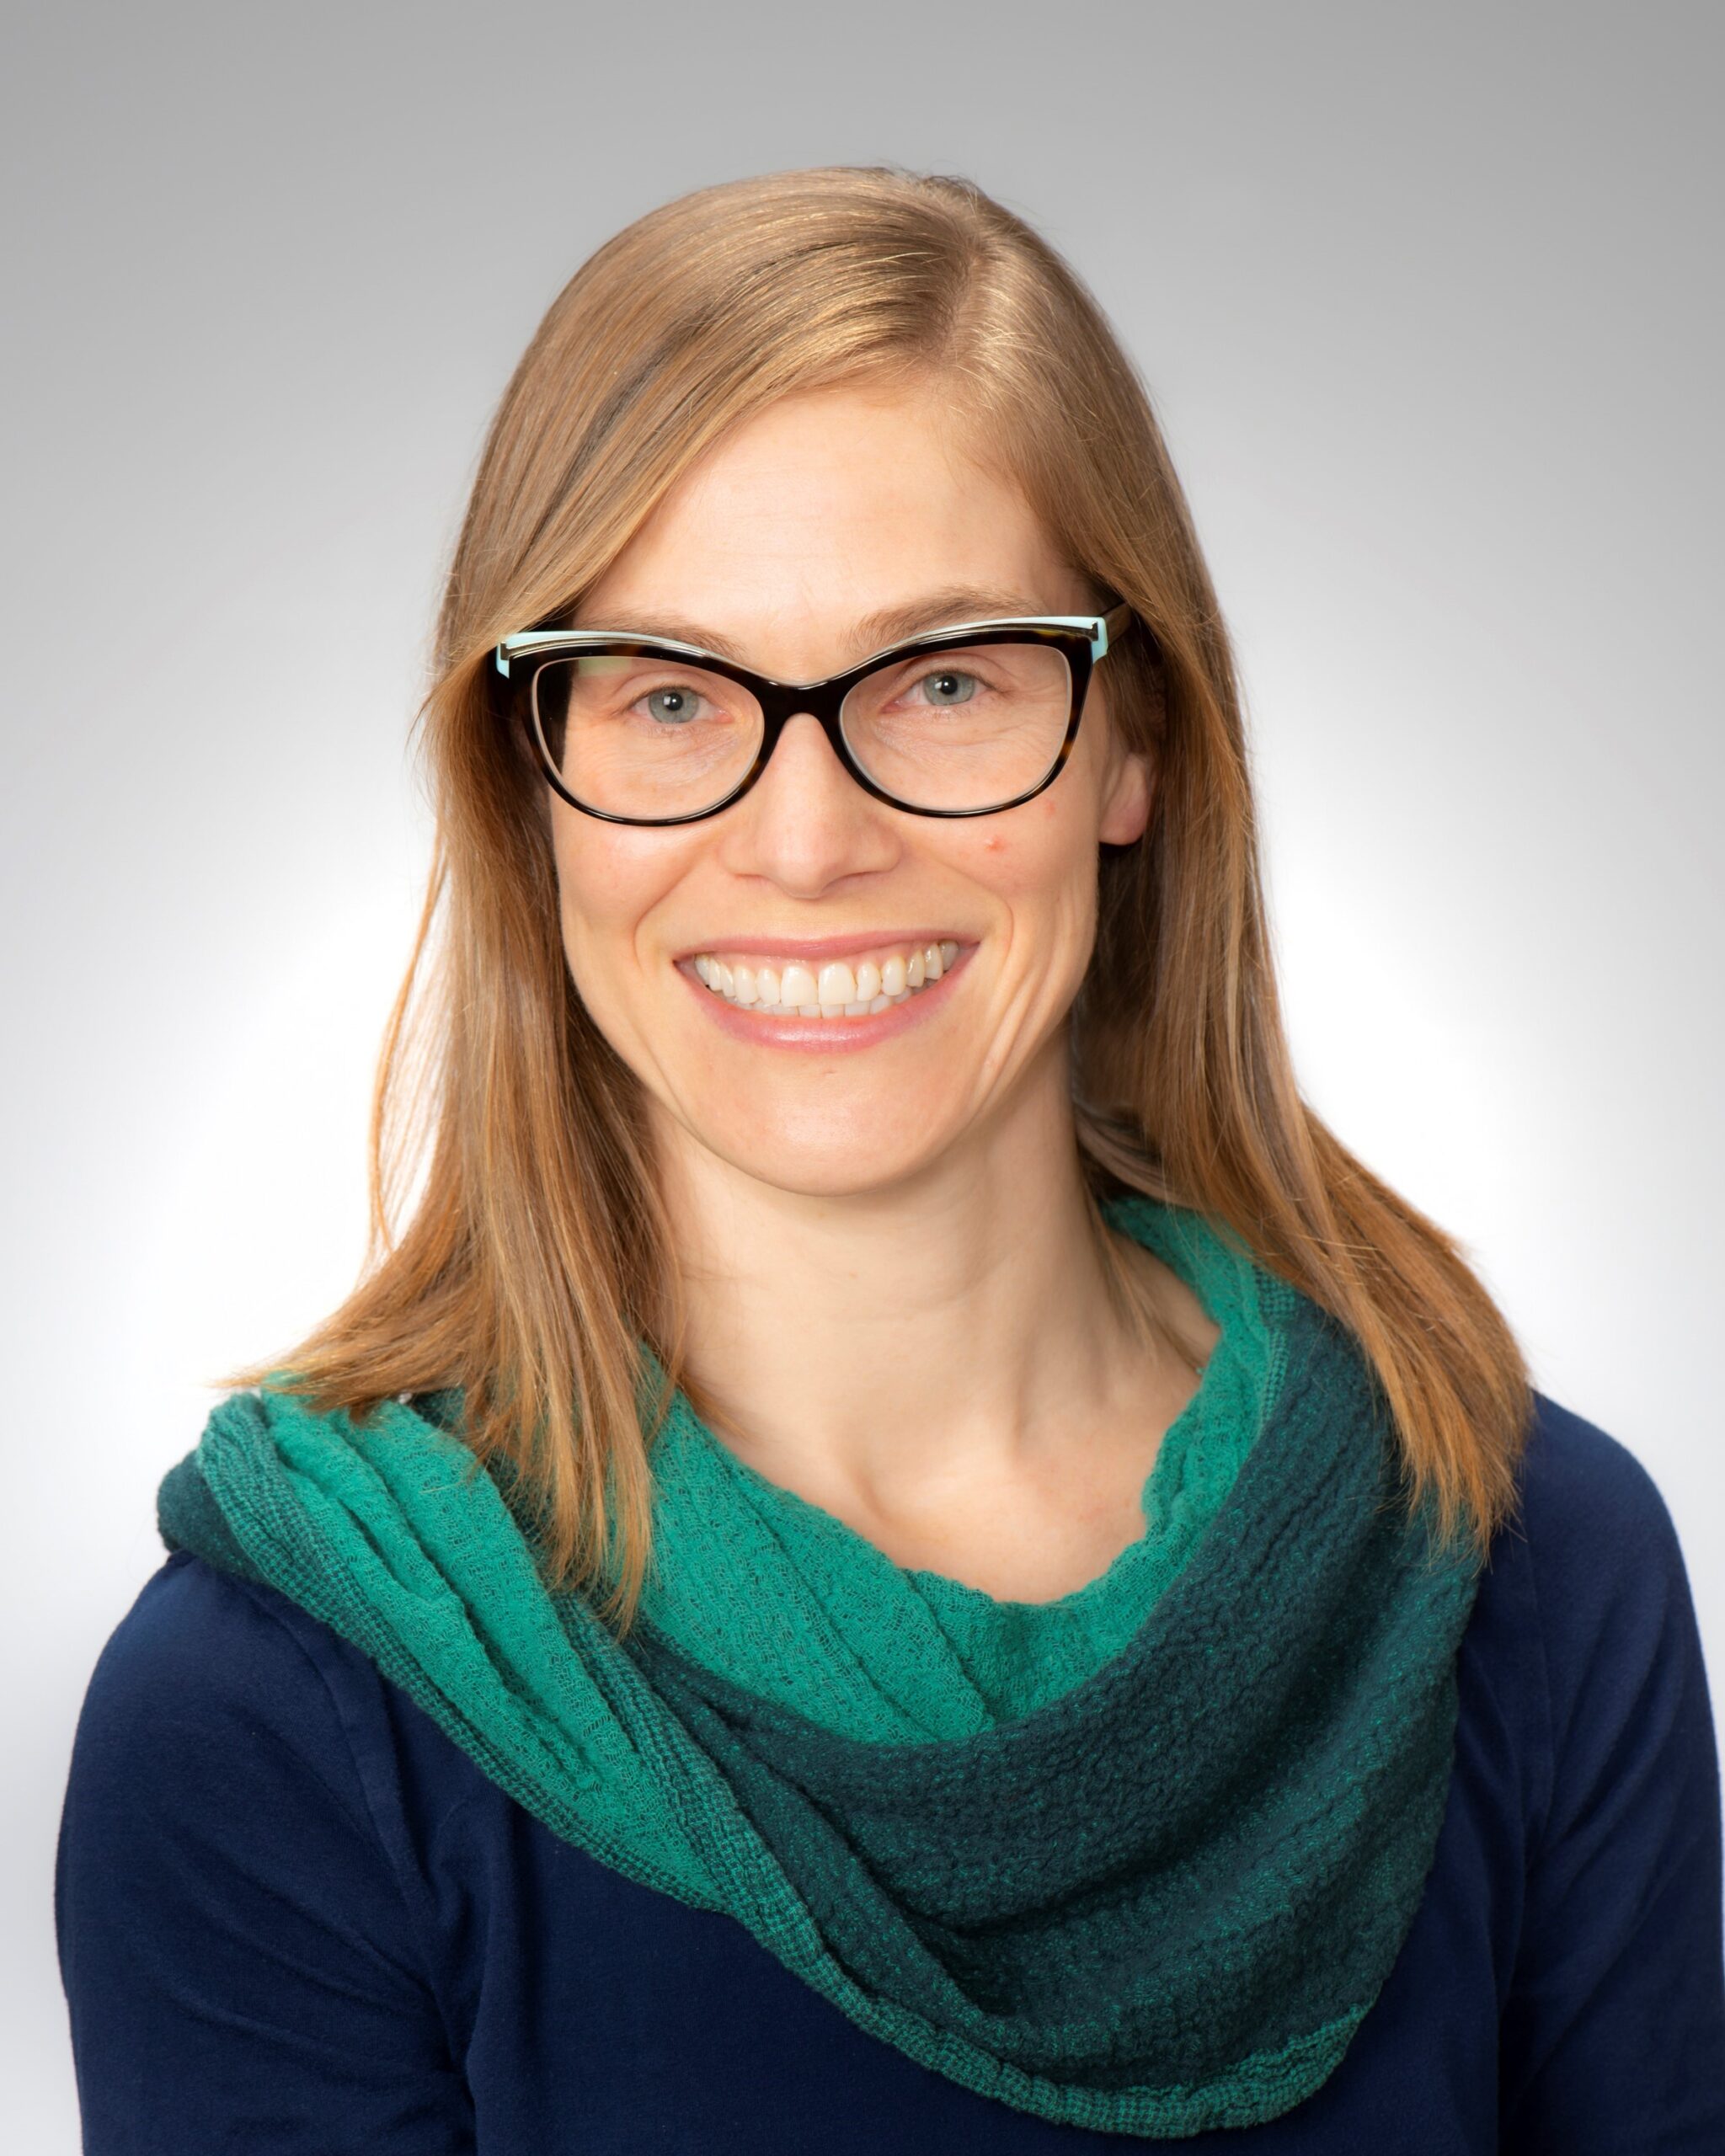 Barbara Nightingale is a smiling woman with long blonde hair. She is wearing black cat-eye glasses and a green and blue sweater.